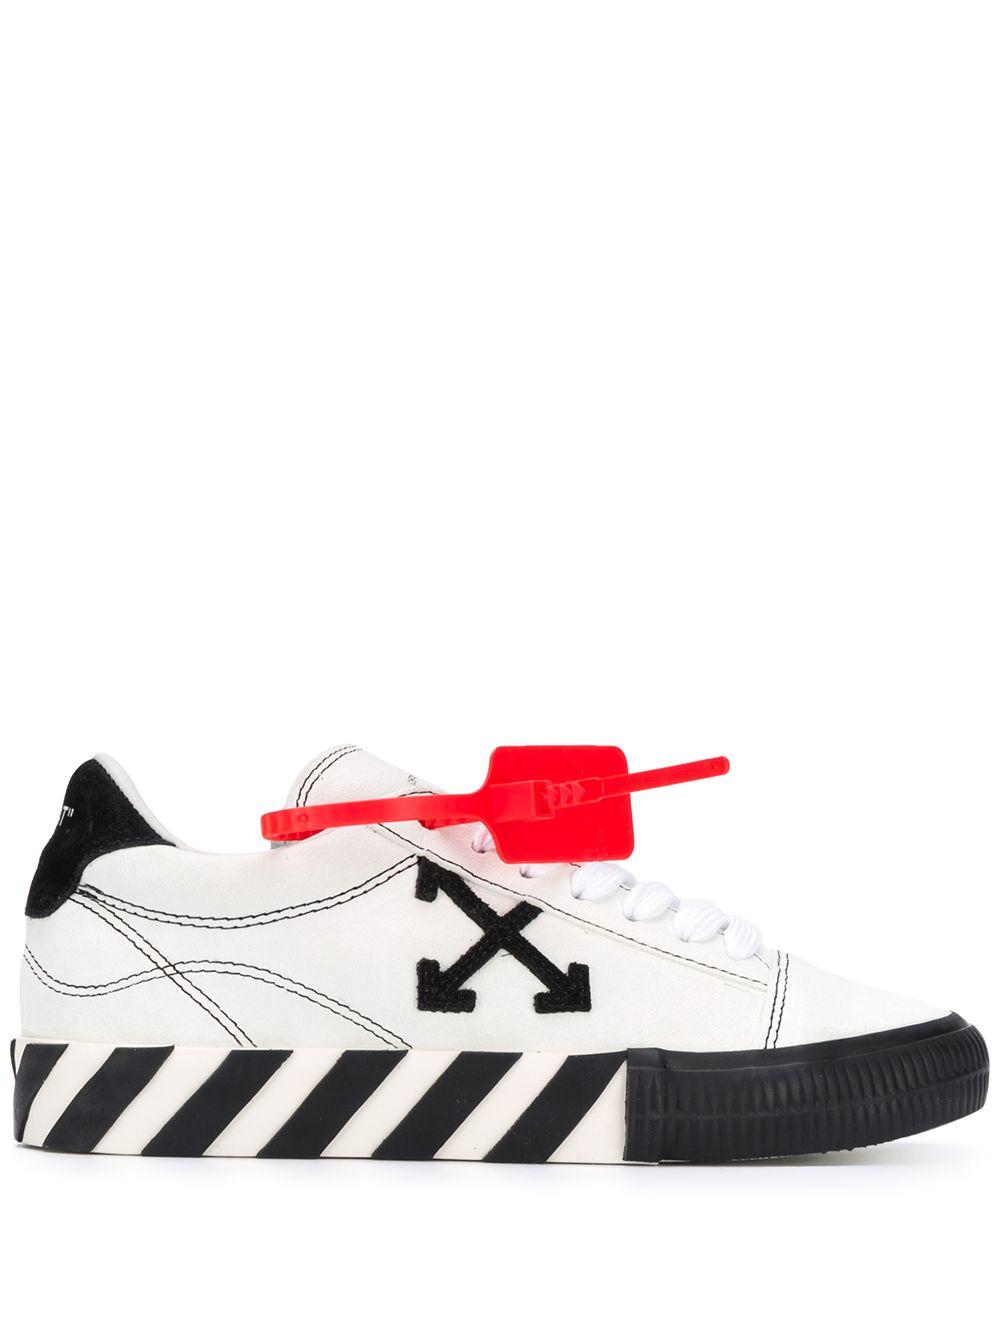 Off-White c/o Virgil Abloh Vulcanized Low Leather Trainers in Black & White (White) Lyst